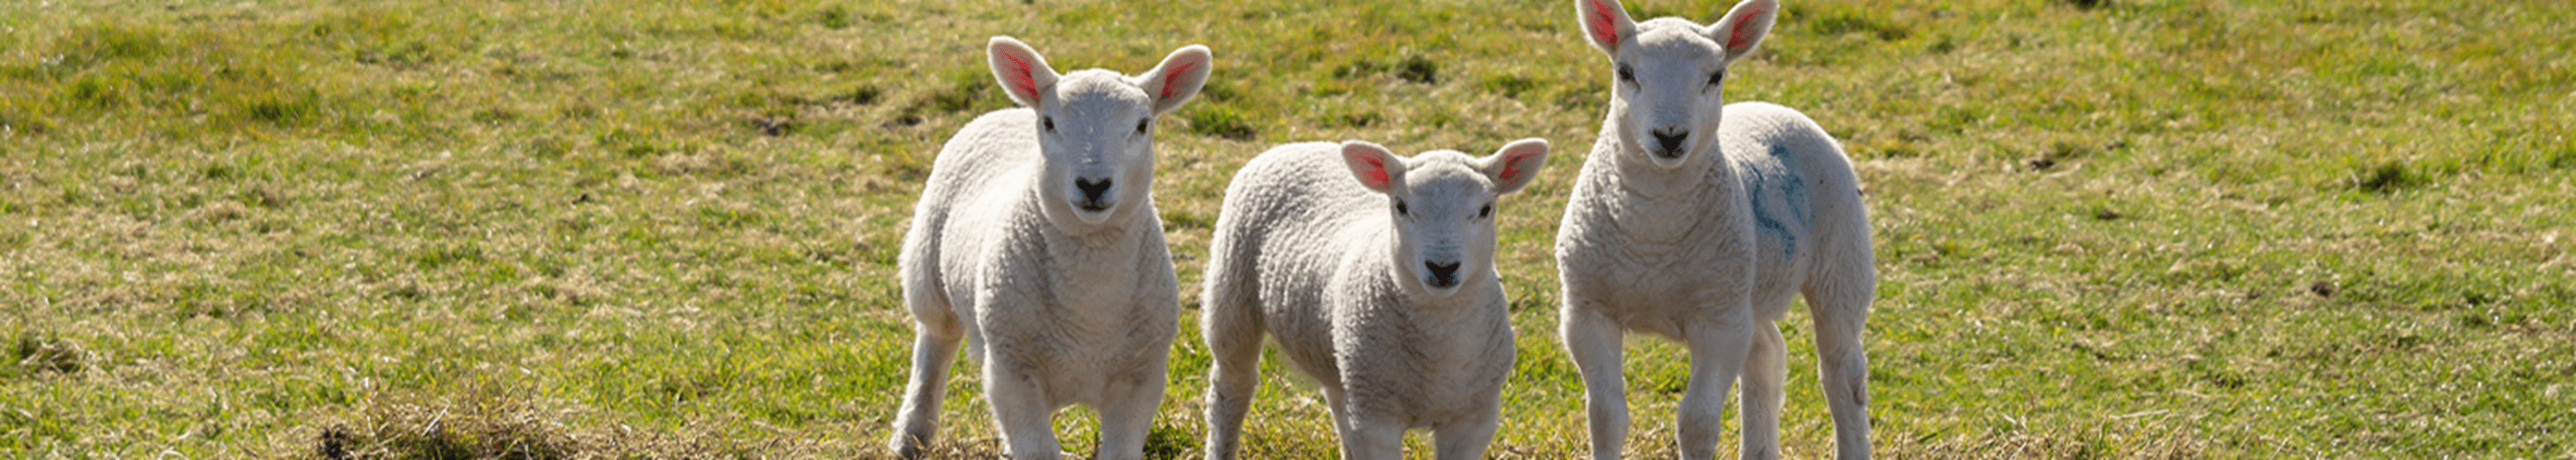 Three lambs standing besides each other